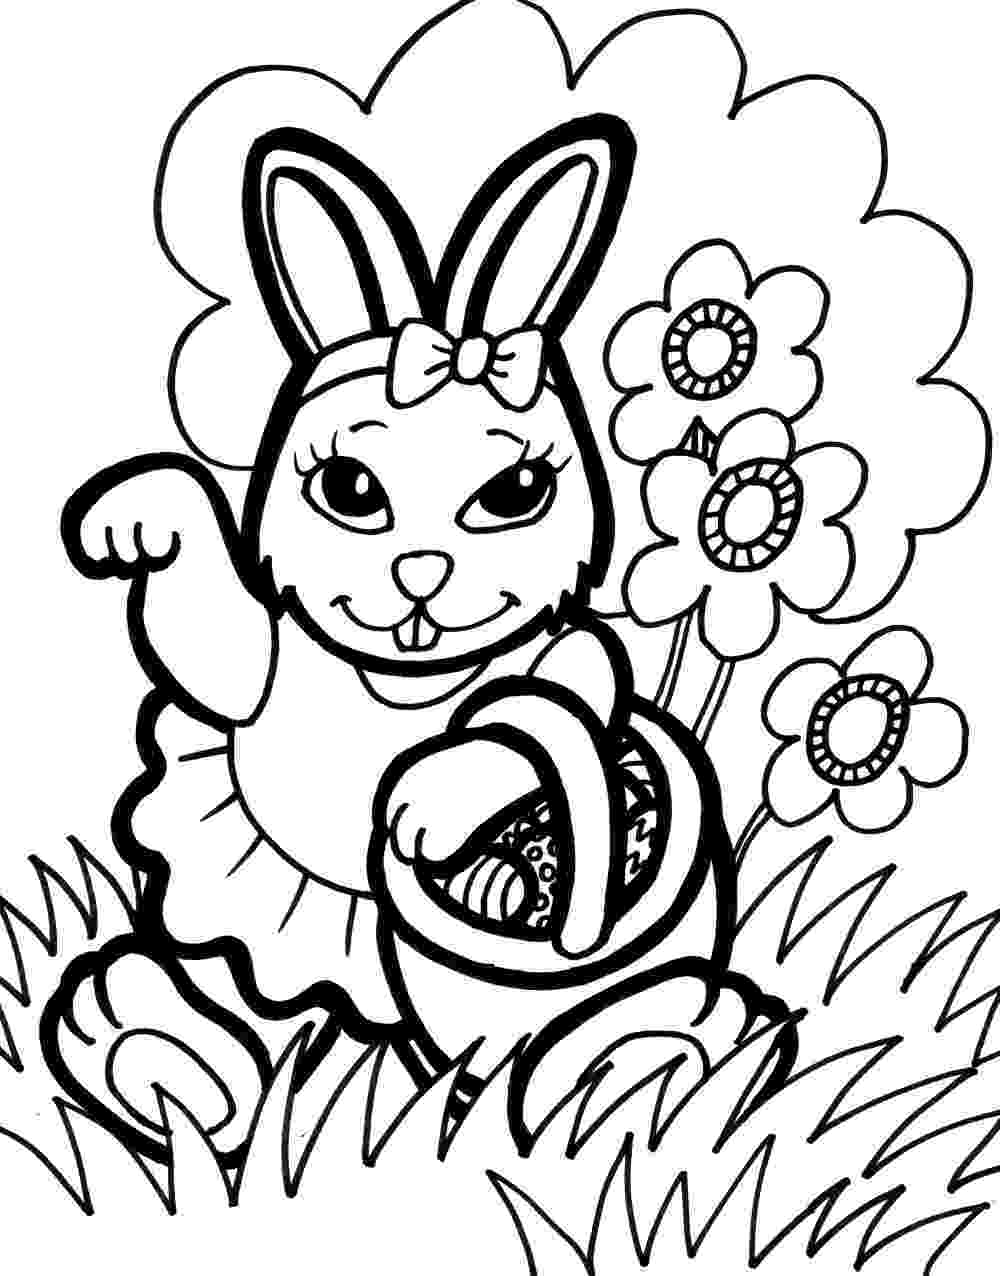 bunny color page bunny coloring pages best coloring pages for kids page color bunny 